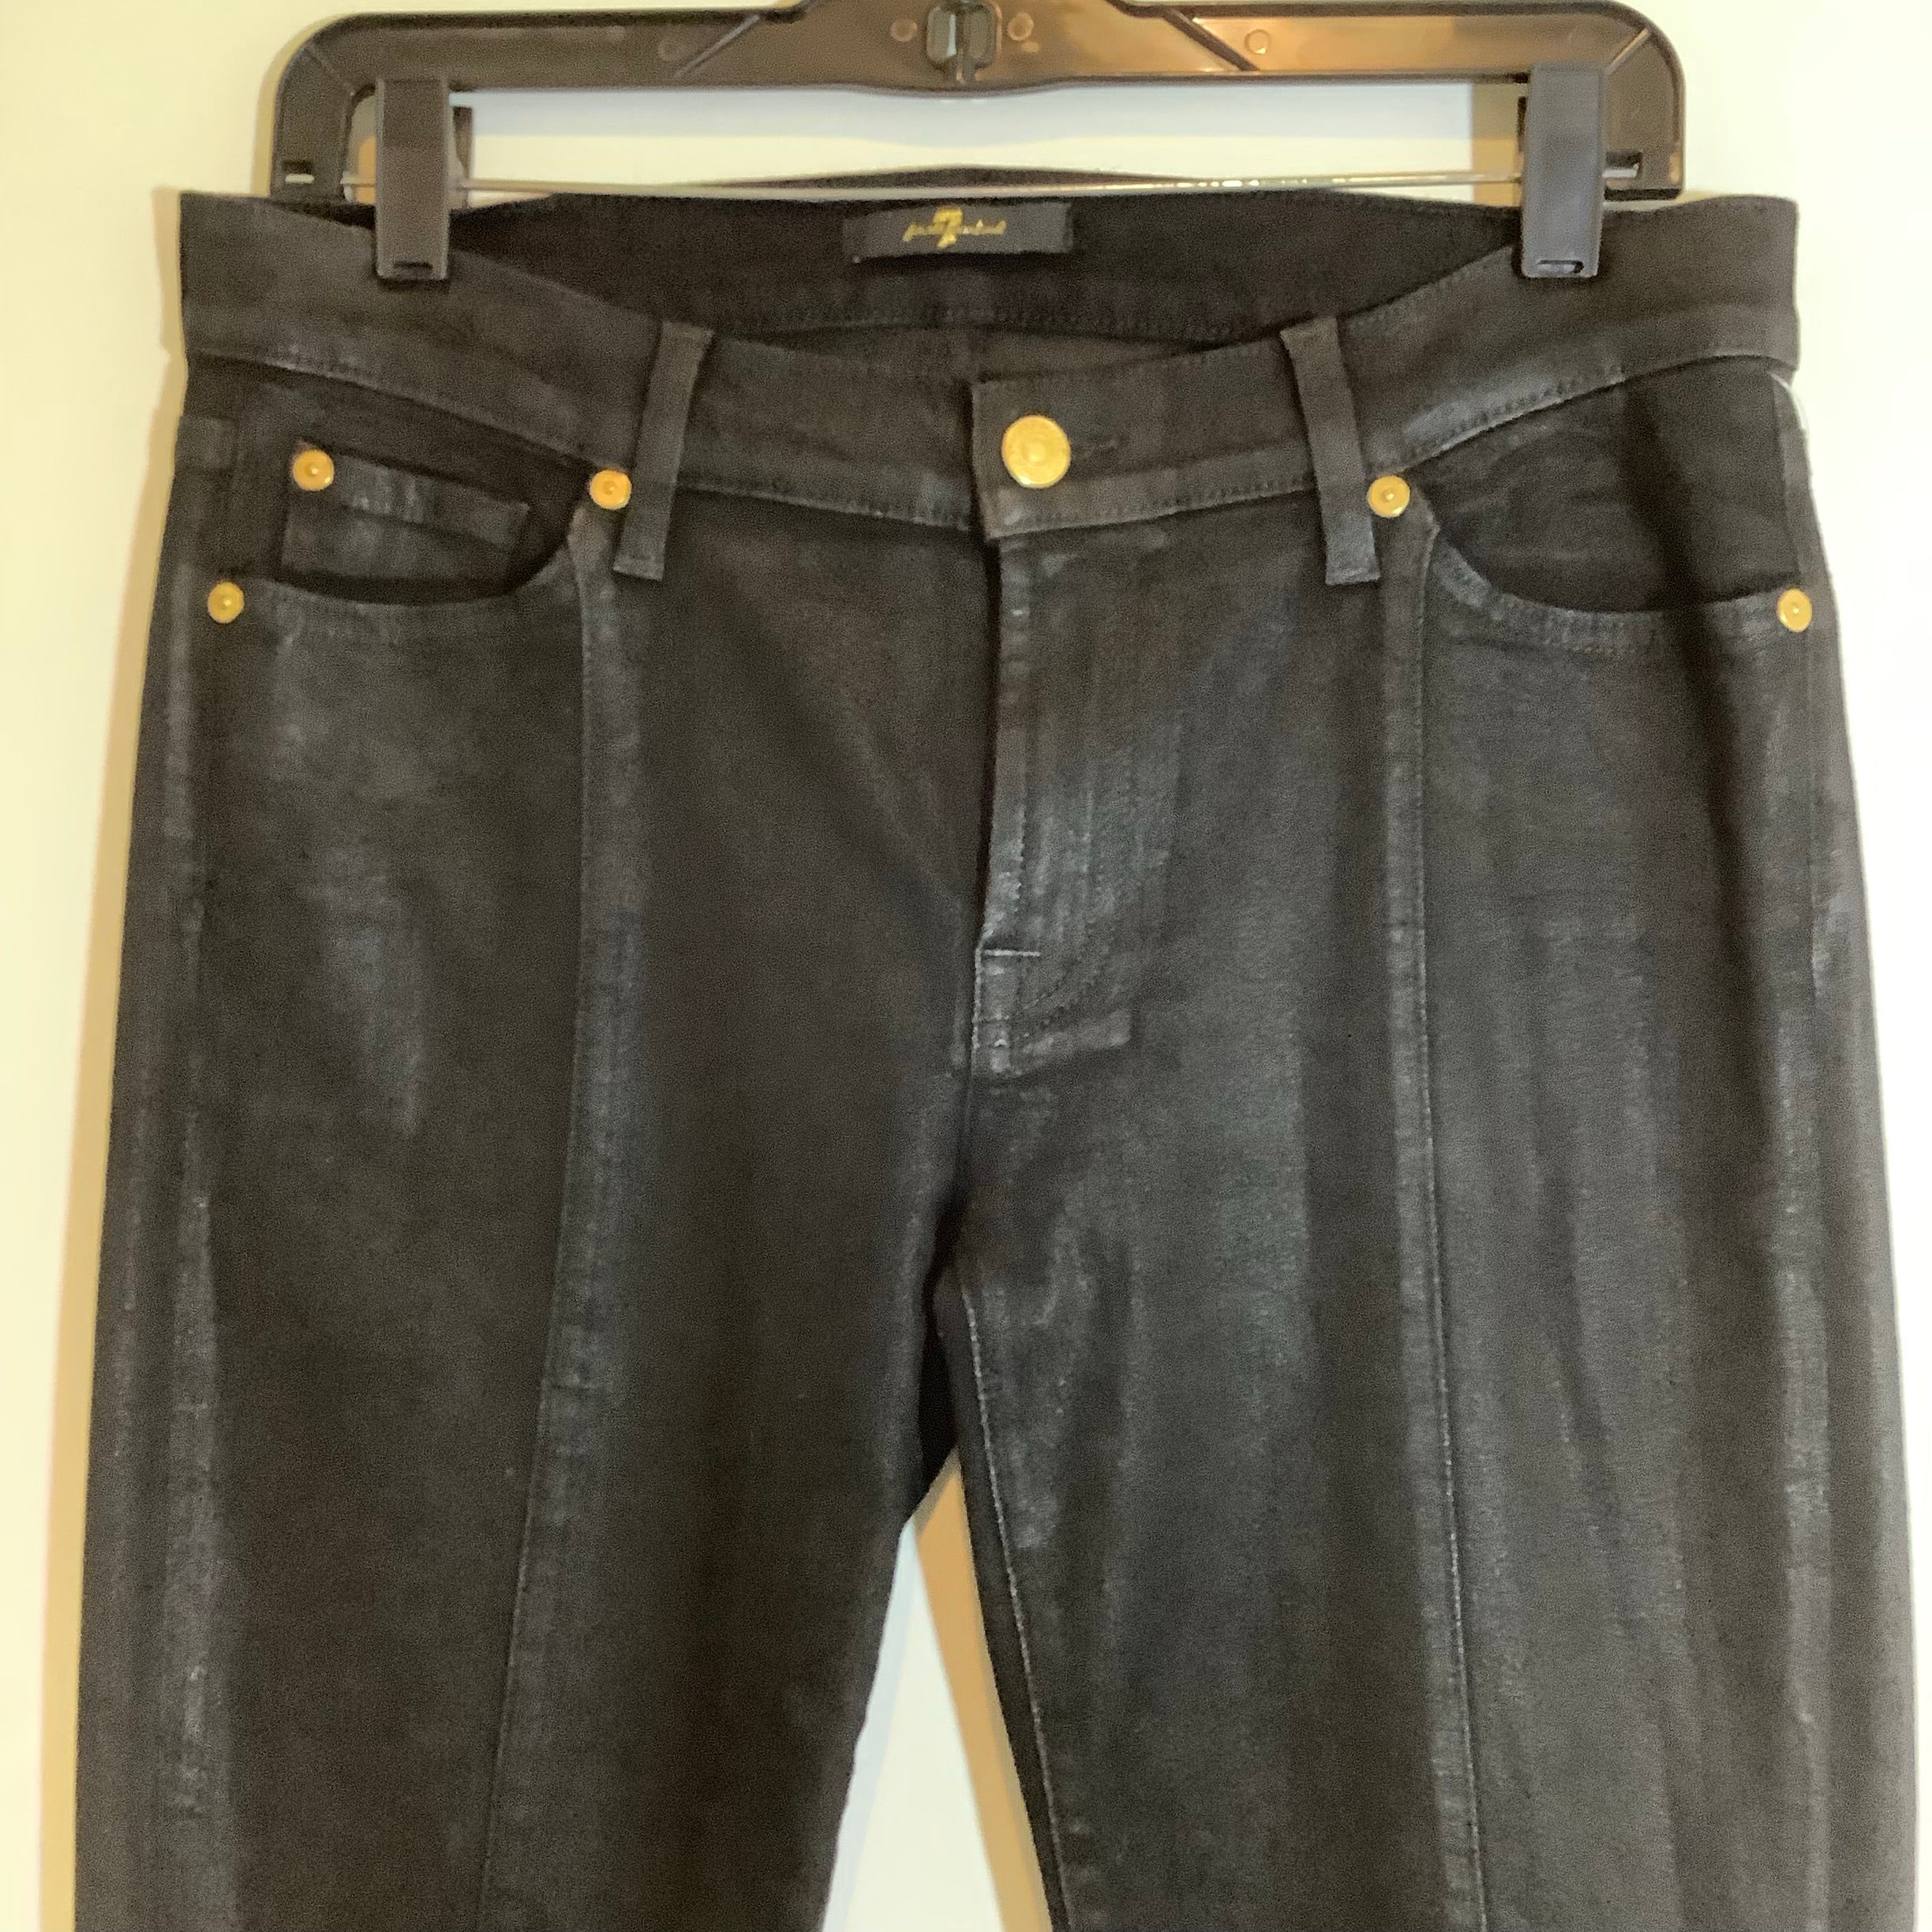 7 For All Mankind Black Jeans Size 31